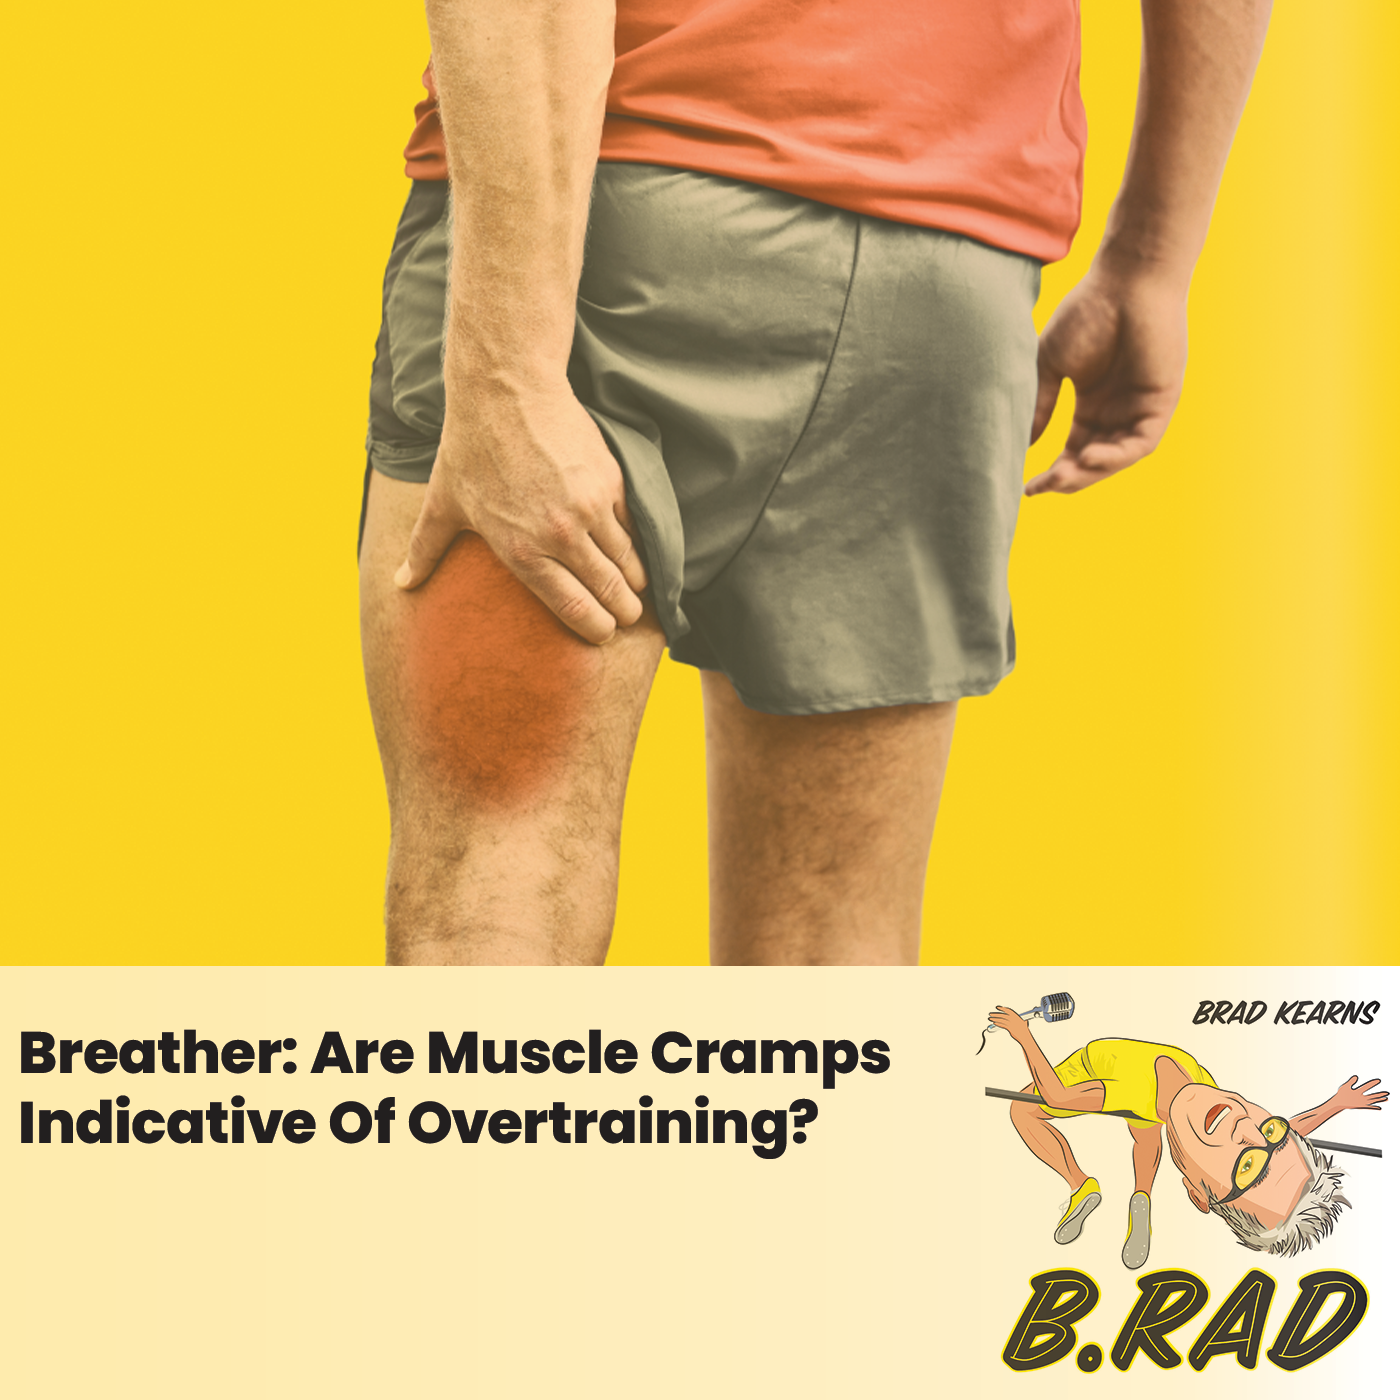 Breather: Are Muscle Cramps Indicative Of Overtraining?